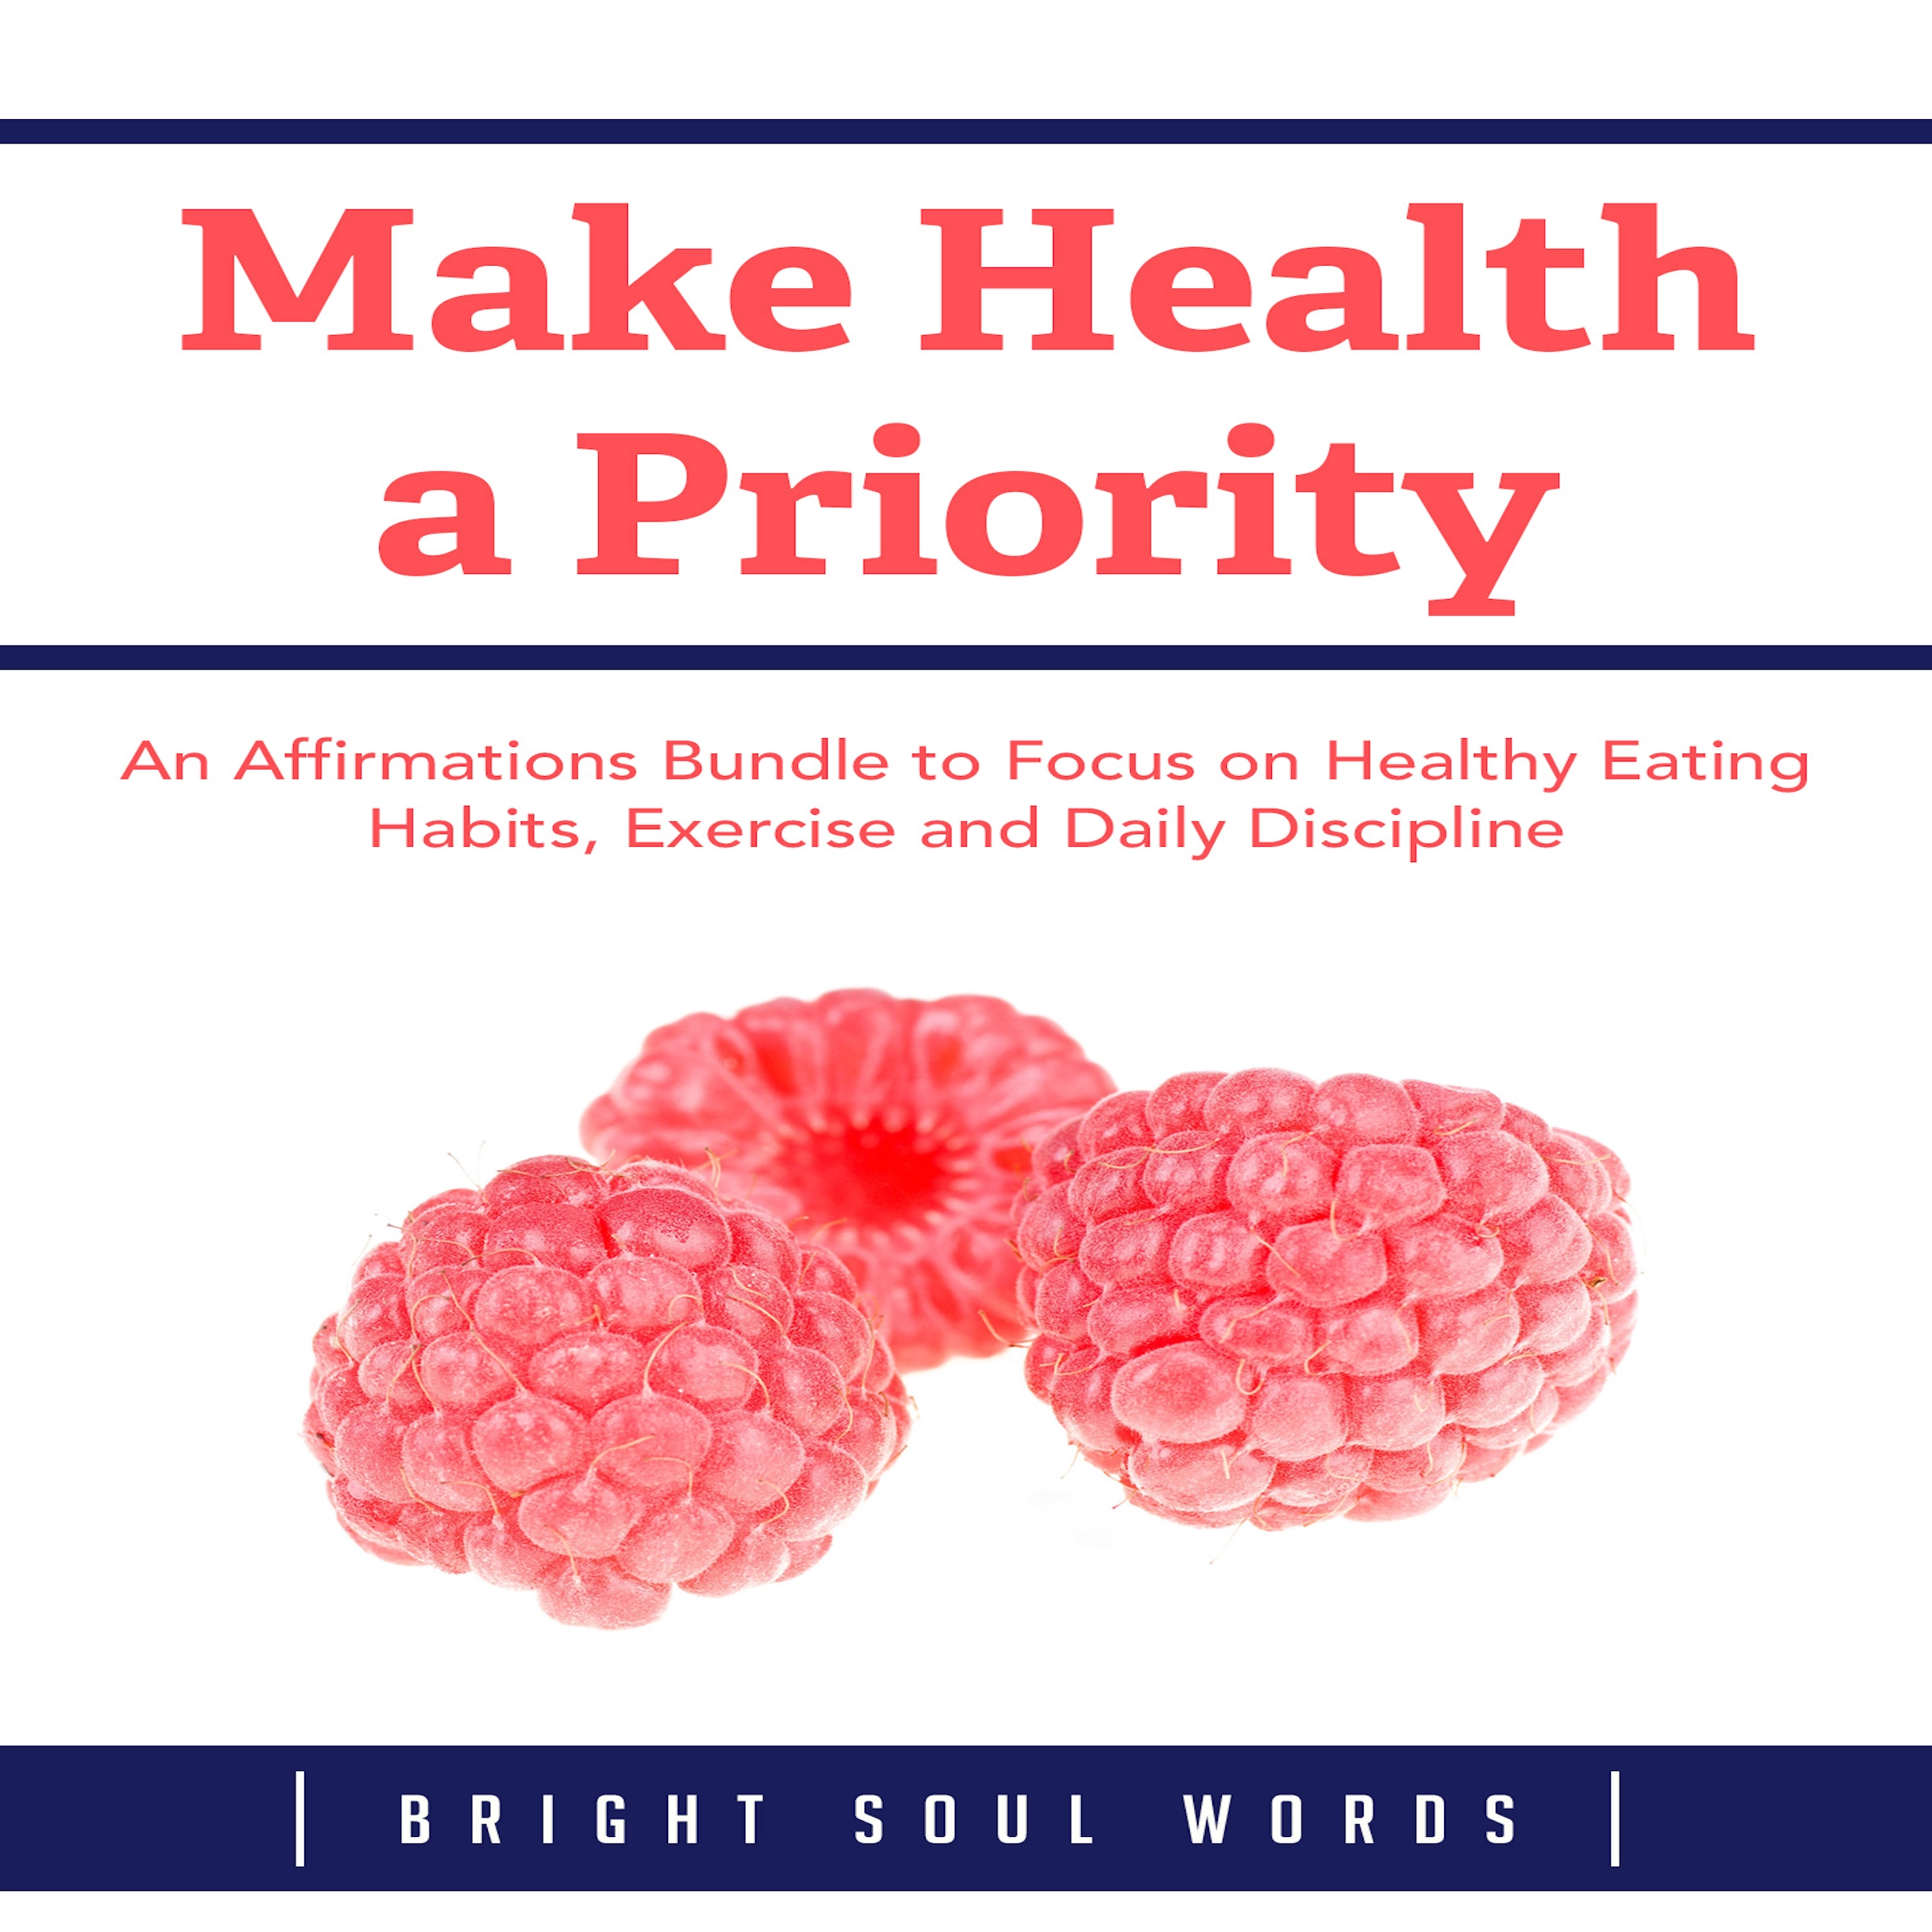 Make Health a Priority: An Affirmations Bundle to Focus on Healthy Eating Habits, Exercise and Daily Discipline Audiobook by Bright Soul Words